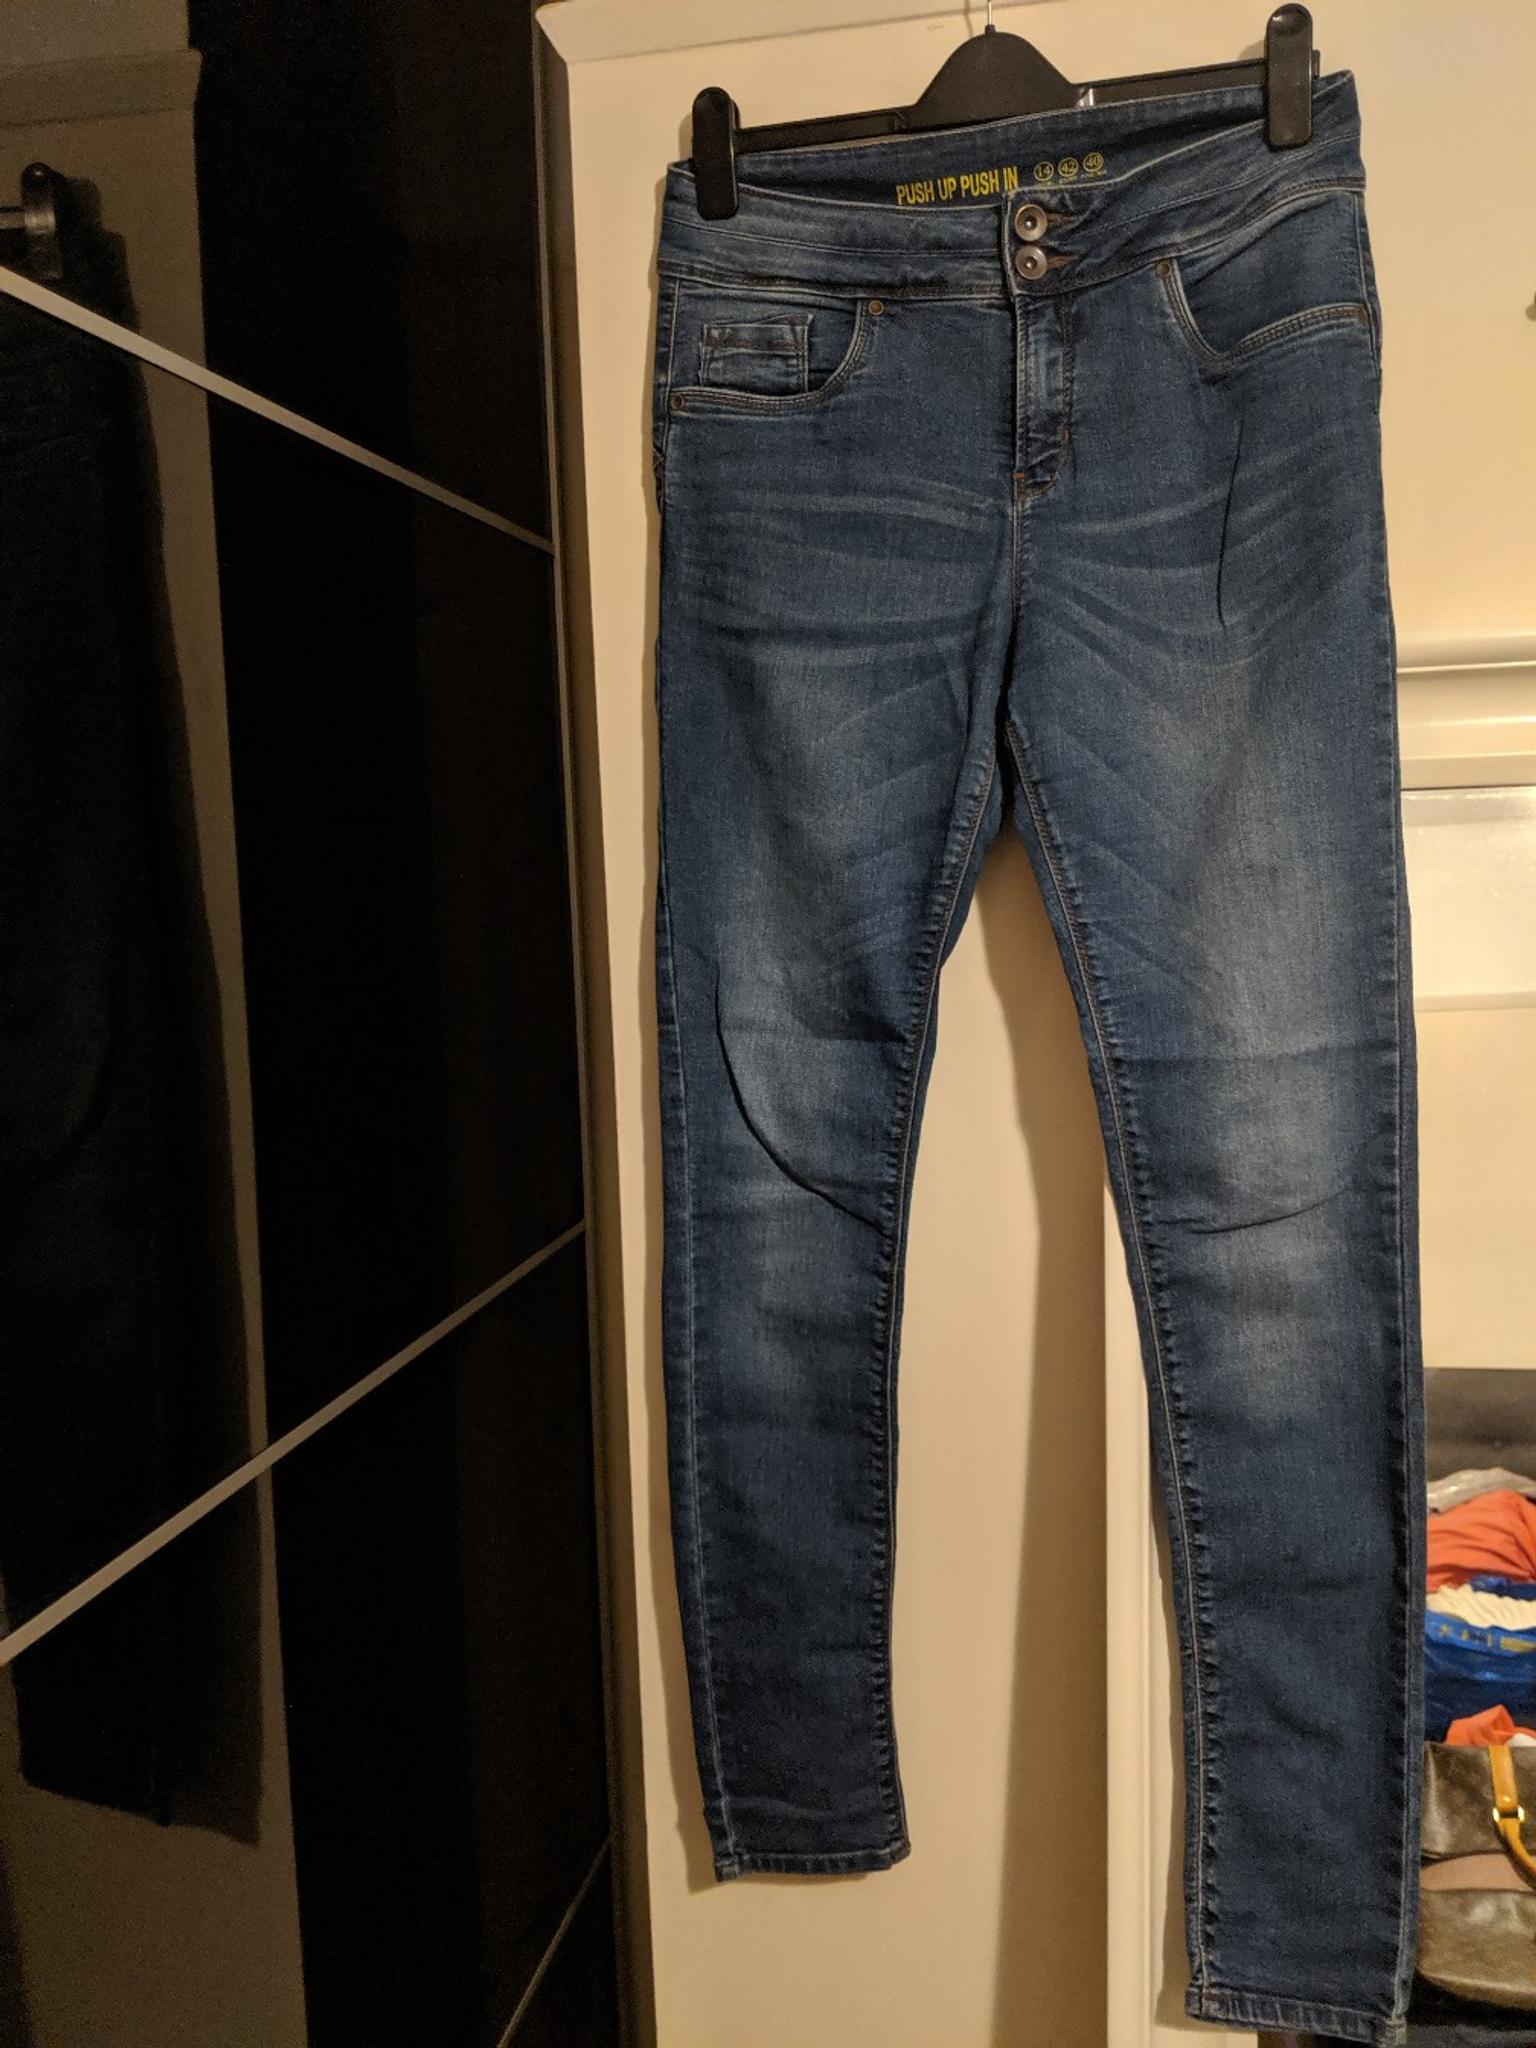 Body Shaping Jeans 14 In London Borough Of Bexley For 5 00 For Sale Shpock